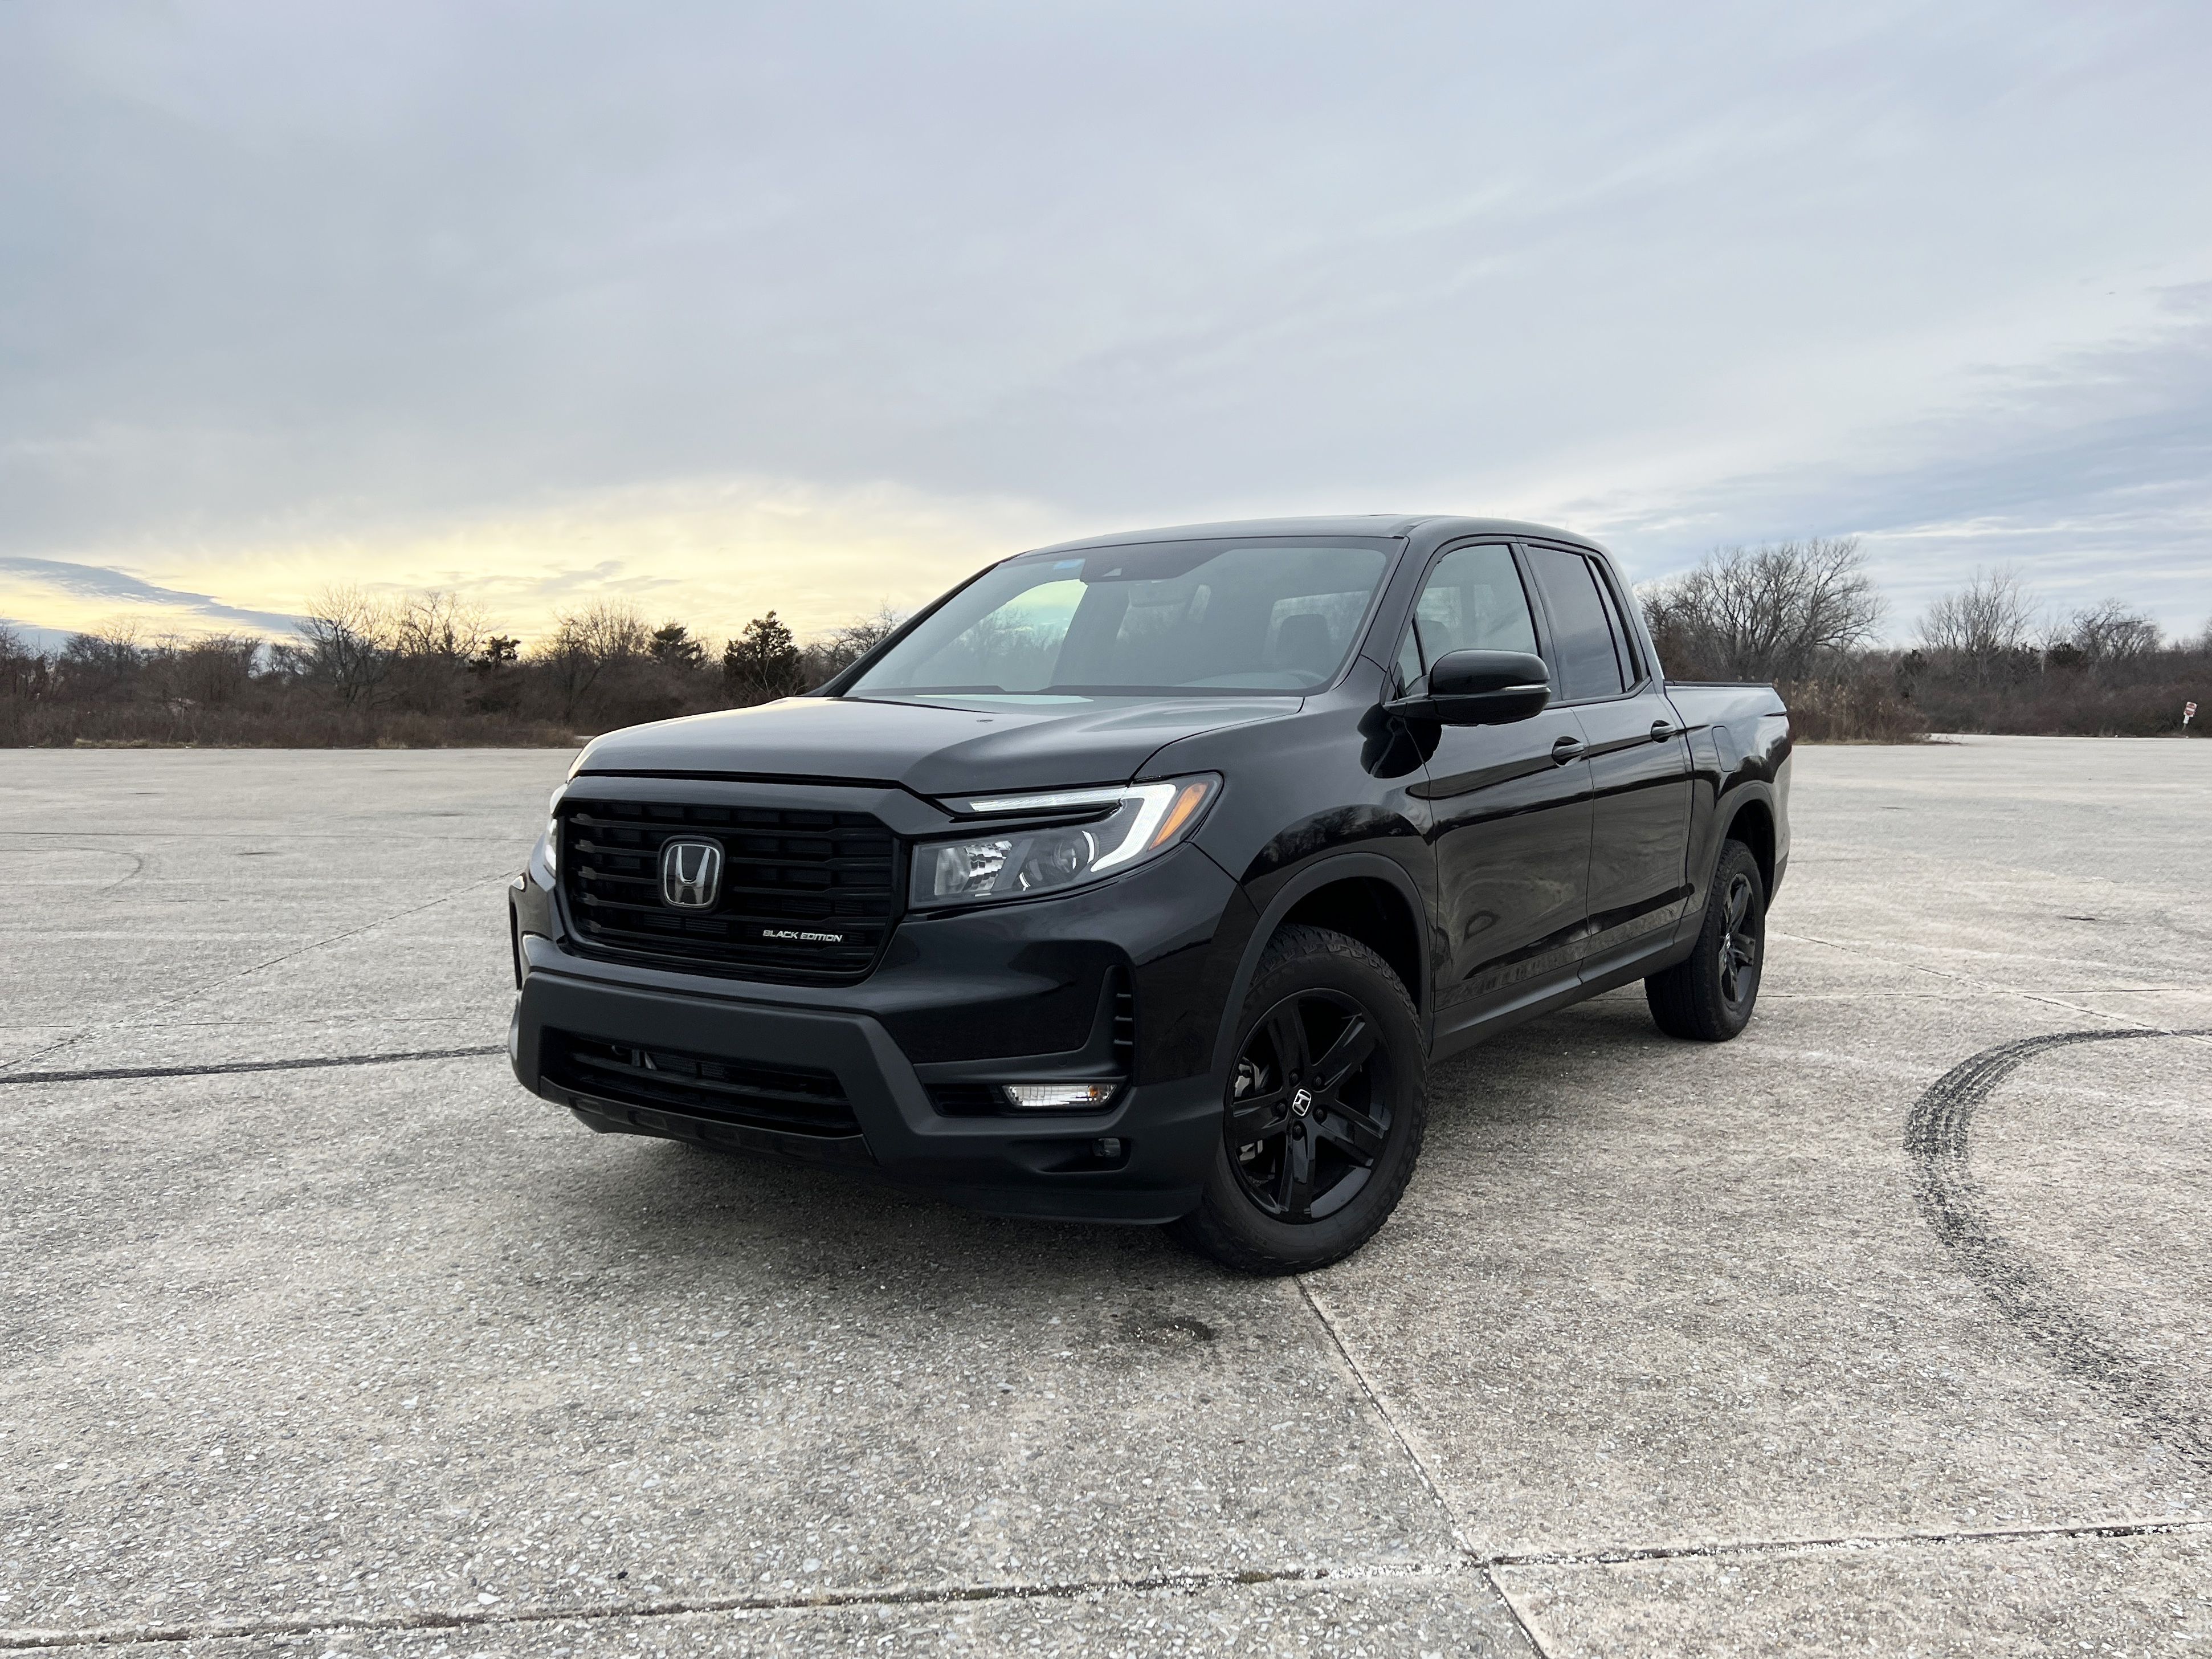 Honda Ridgeline Black Edition Review, Pricing, and Specs